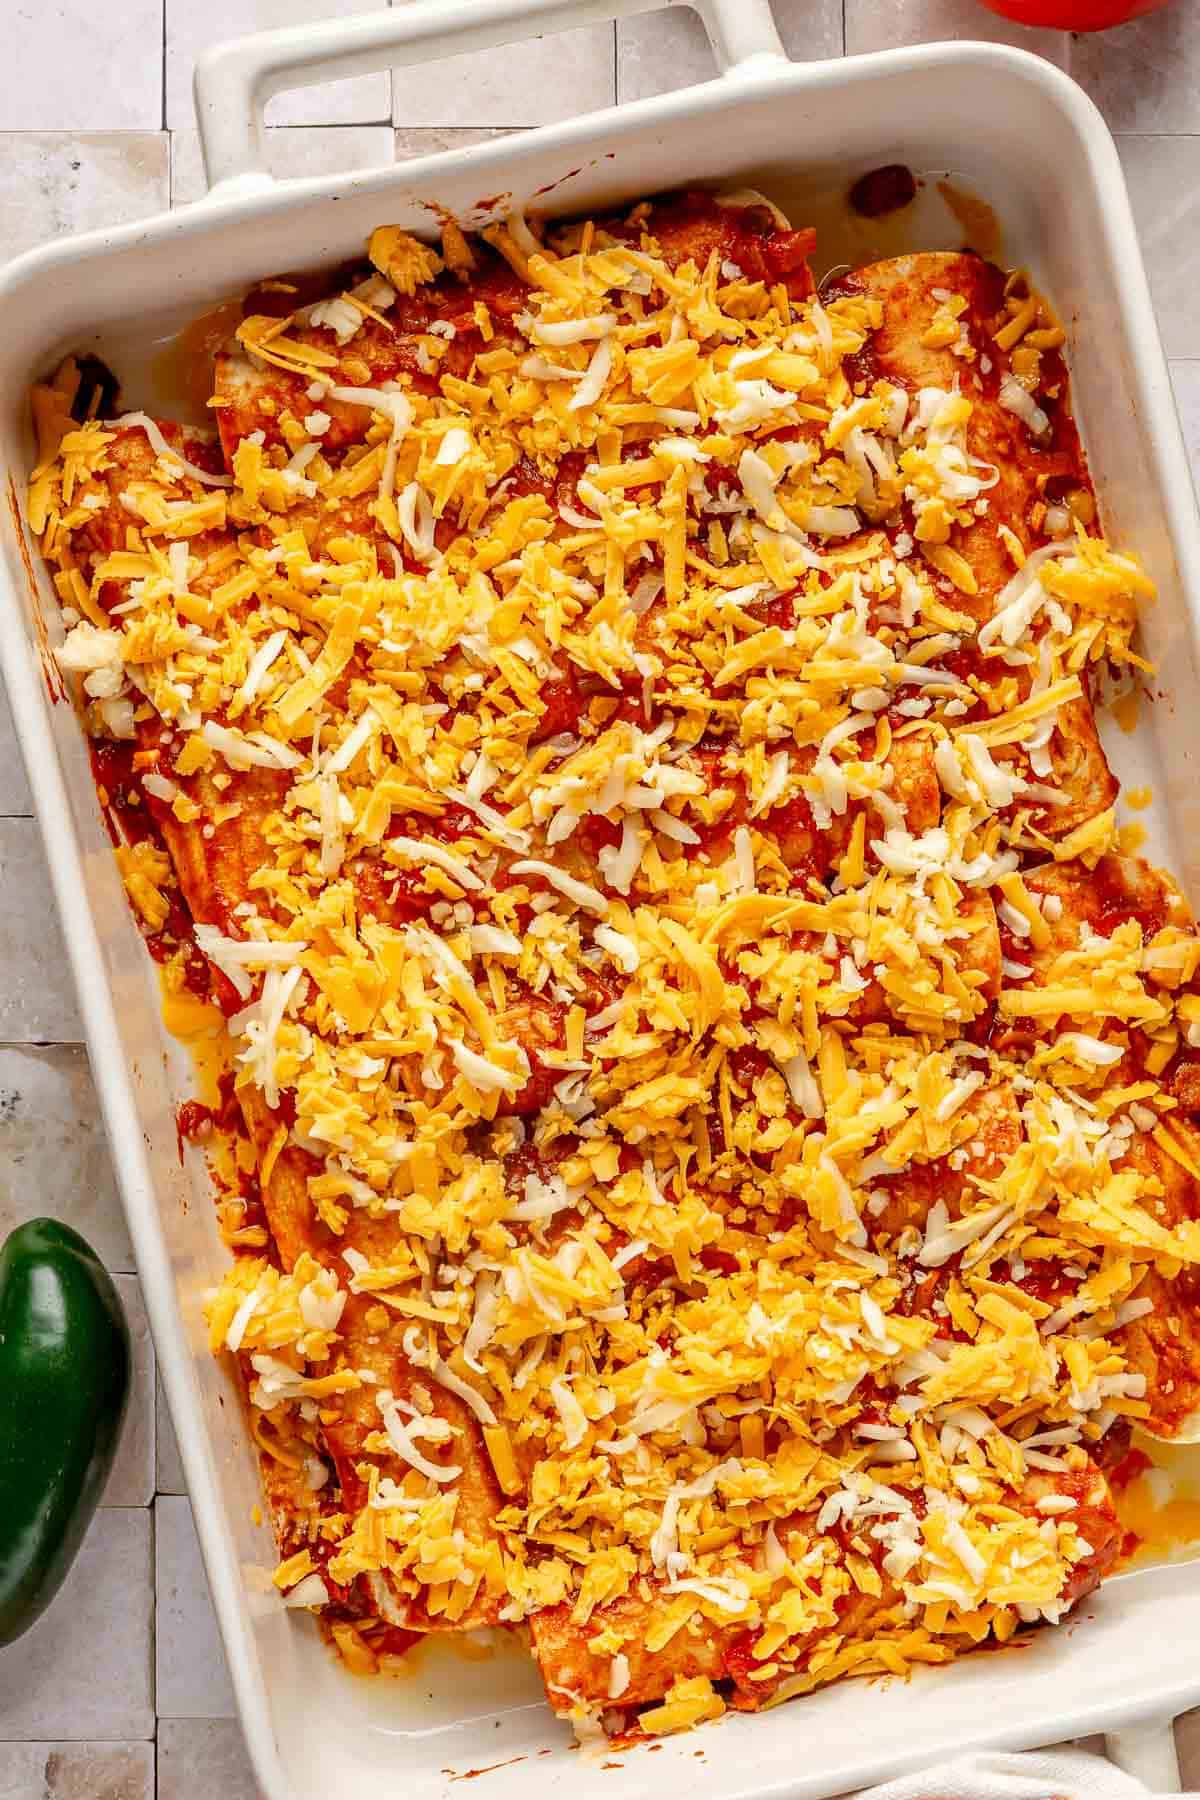 beef enchiladas in a baking dish with red enchilada sauce and shredded cheese sprinkled on top